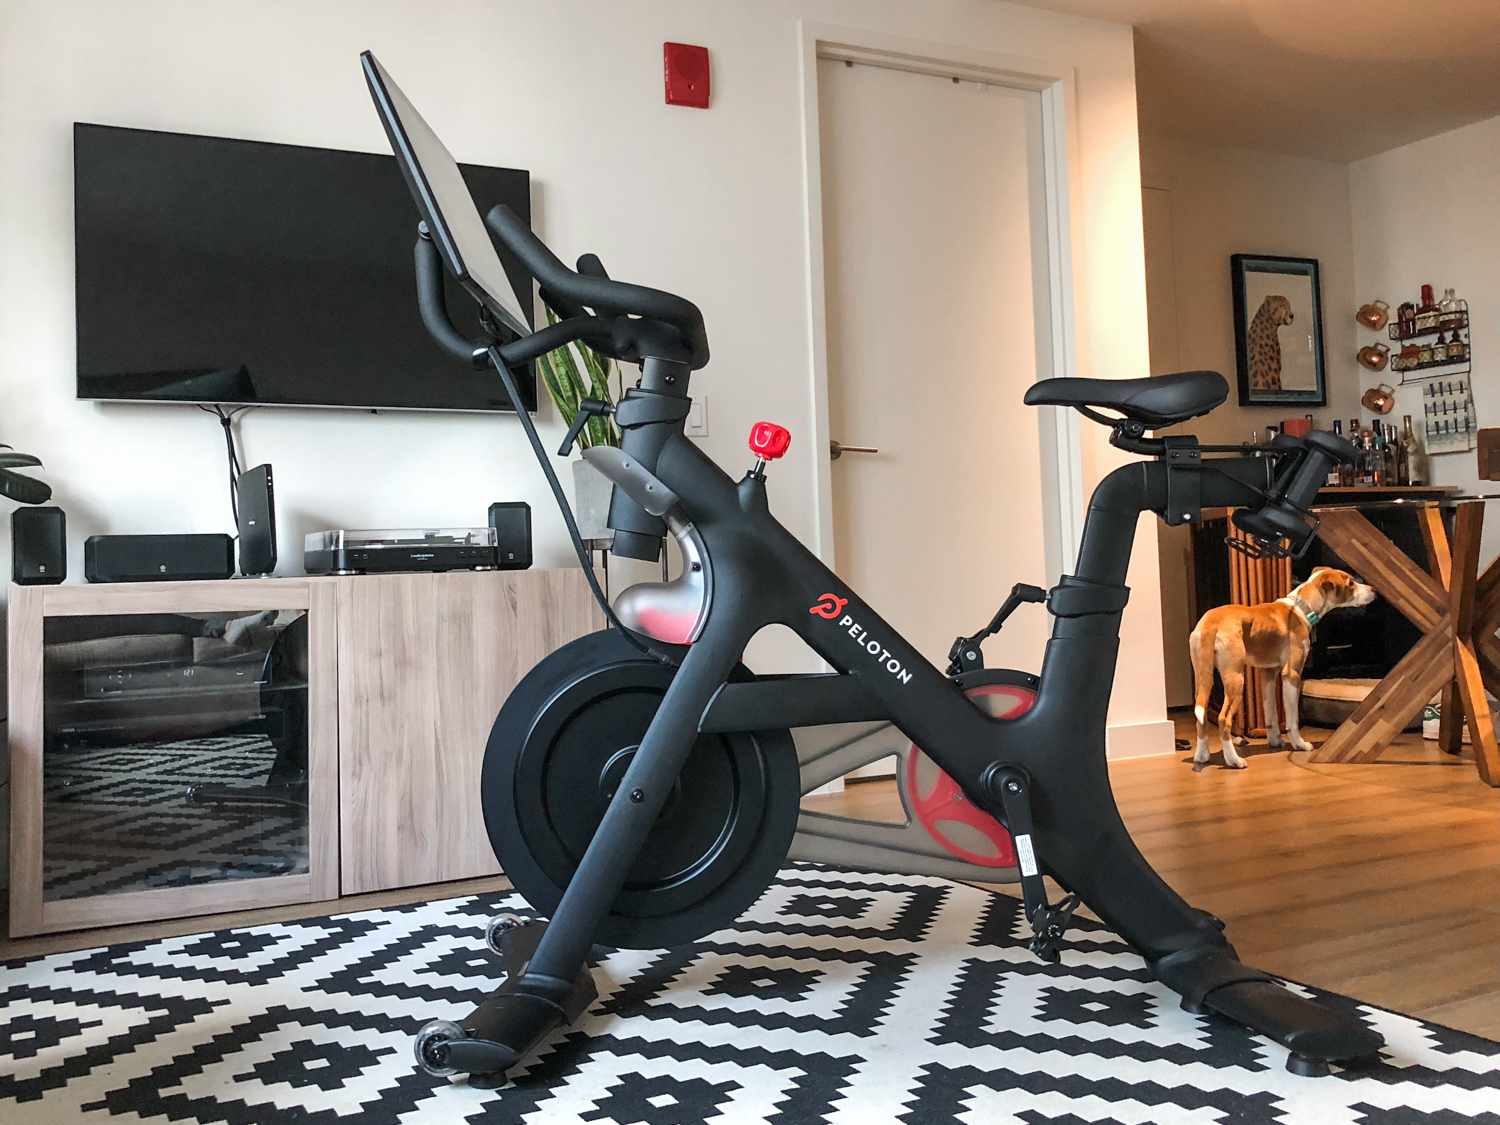 A Peloton bike set up on a rug in front of a living room TV